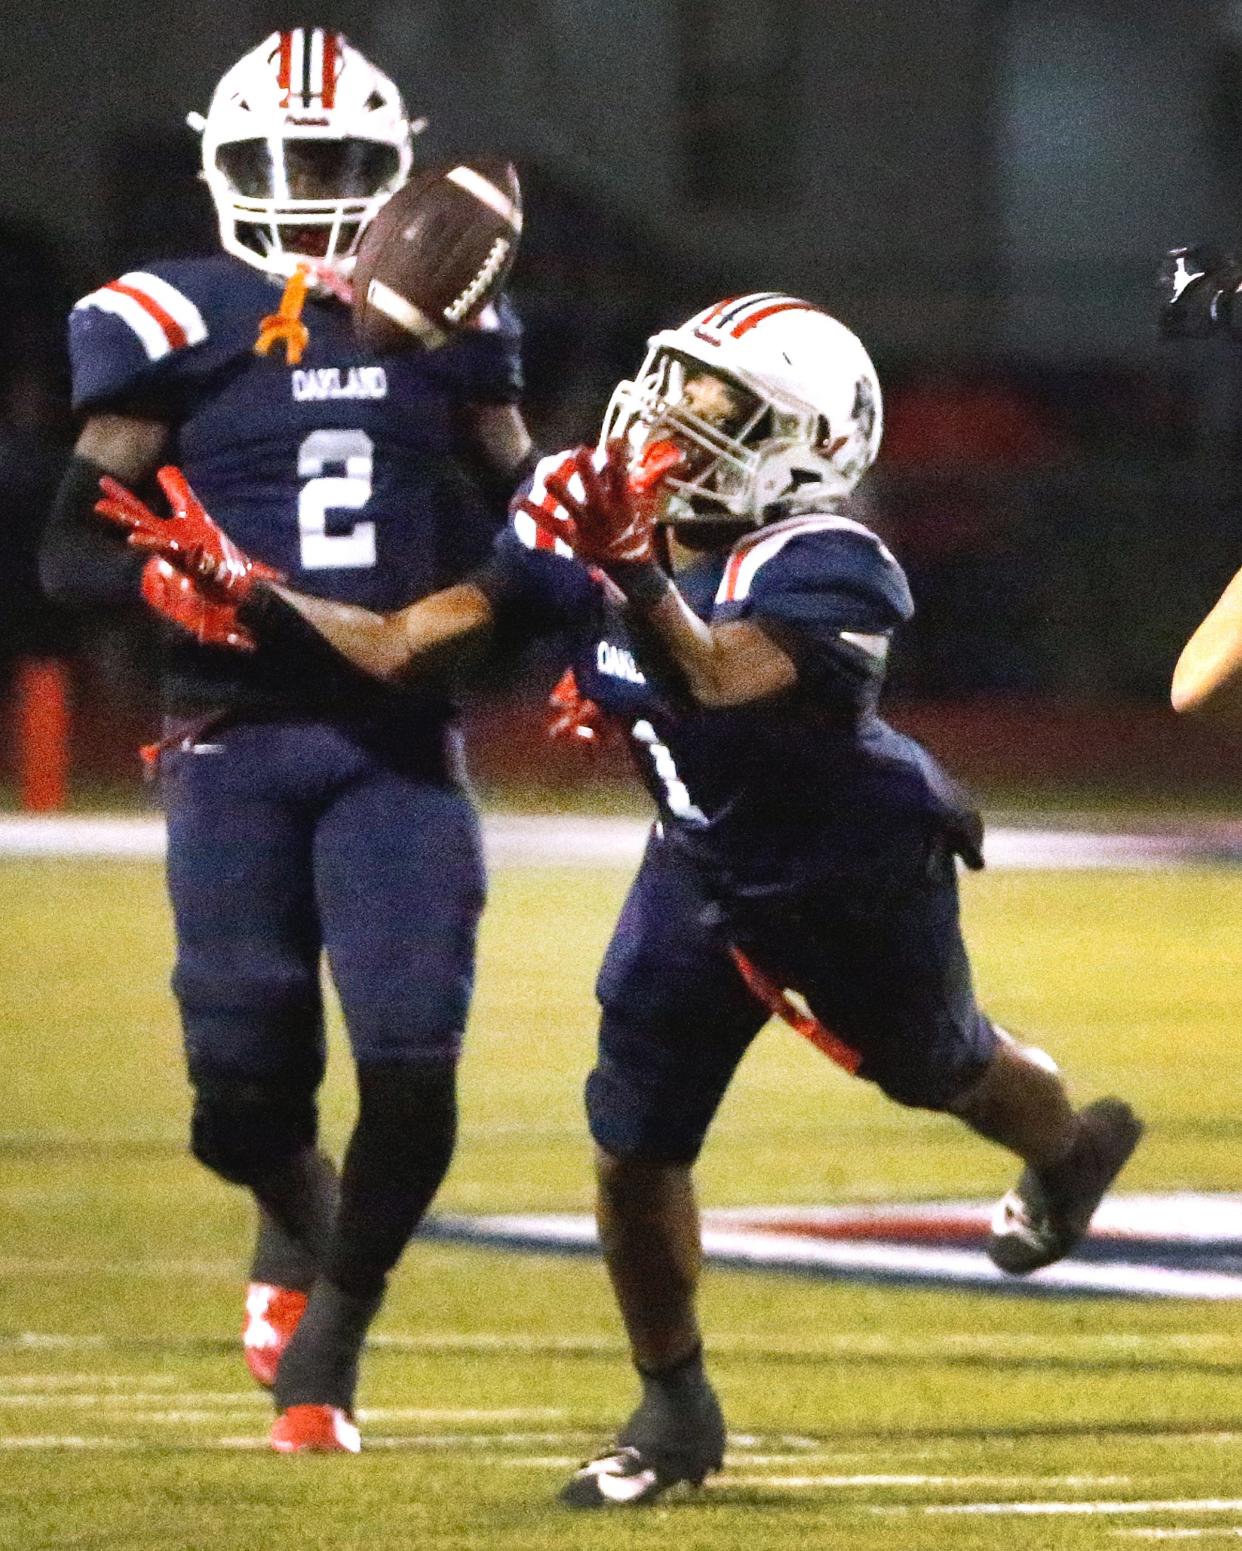 Oakland's Craig Tutt (1) intercepts the ball intended for Riverdale as Oakland's Stephen Ellison (2) looks on during the Battle of the Boro football game at Oakland on Friday, Oct. 27, 2023.